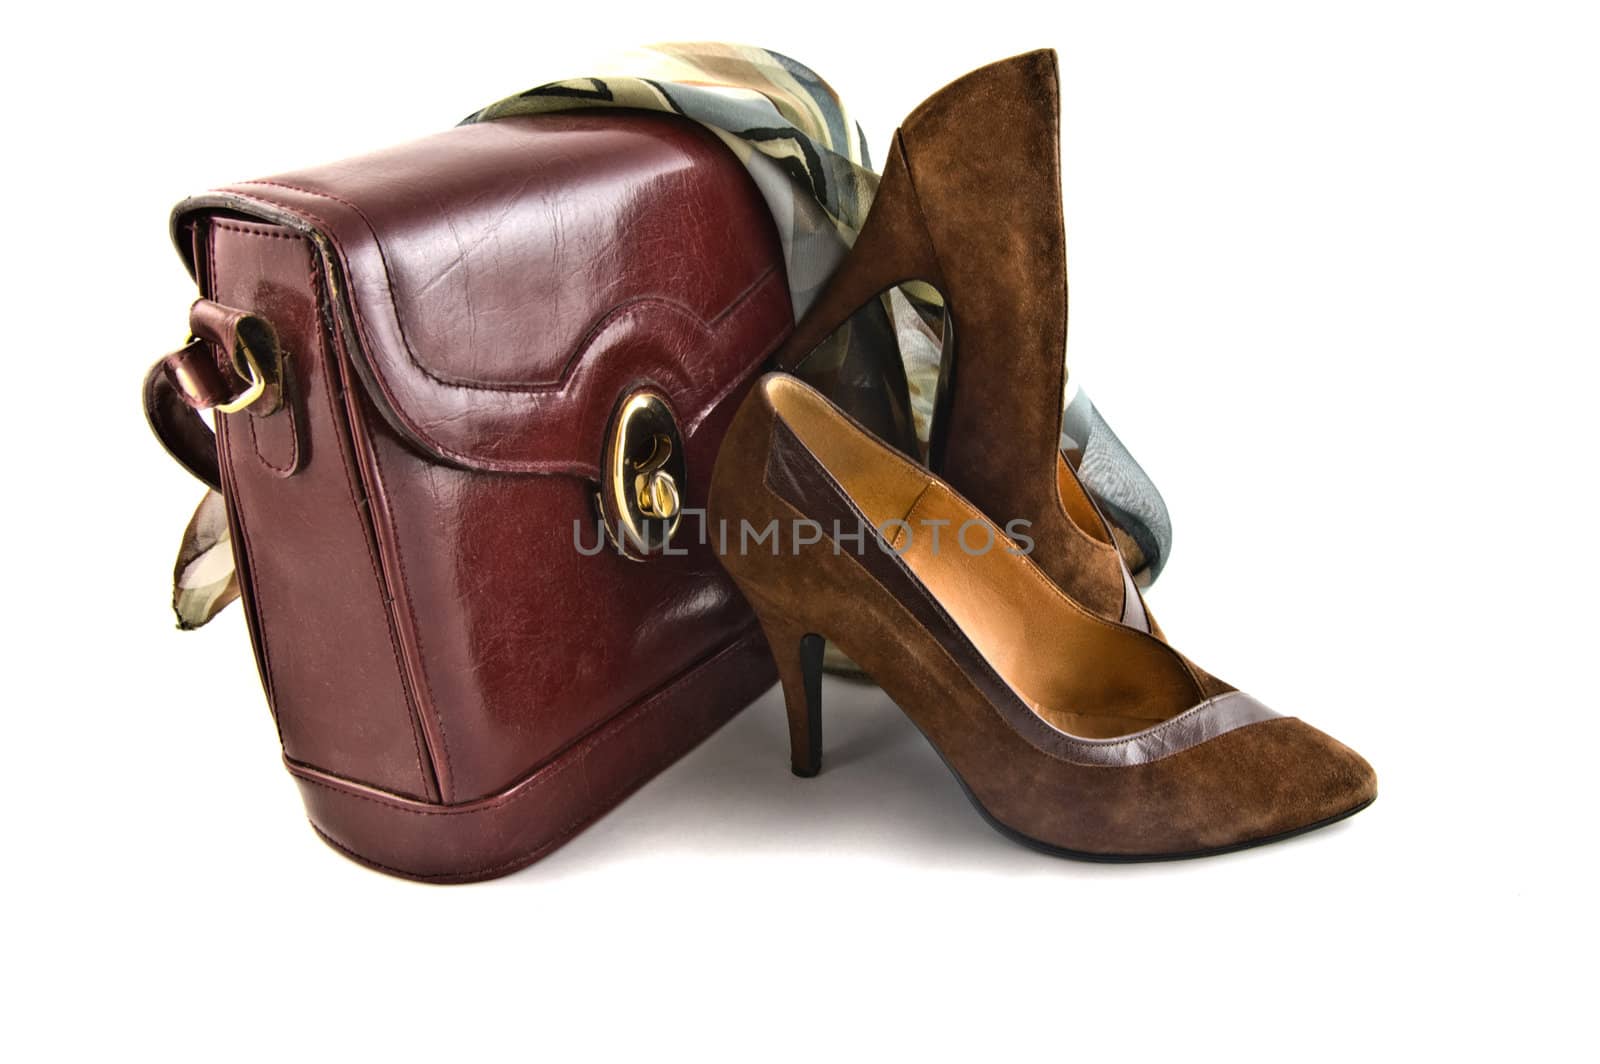 old shoes and bag on white background isolated by galcka